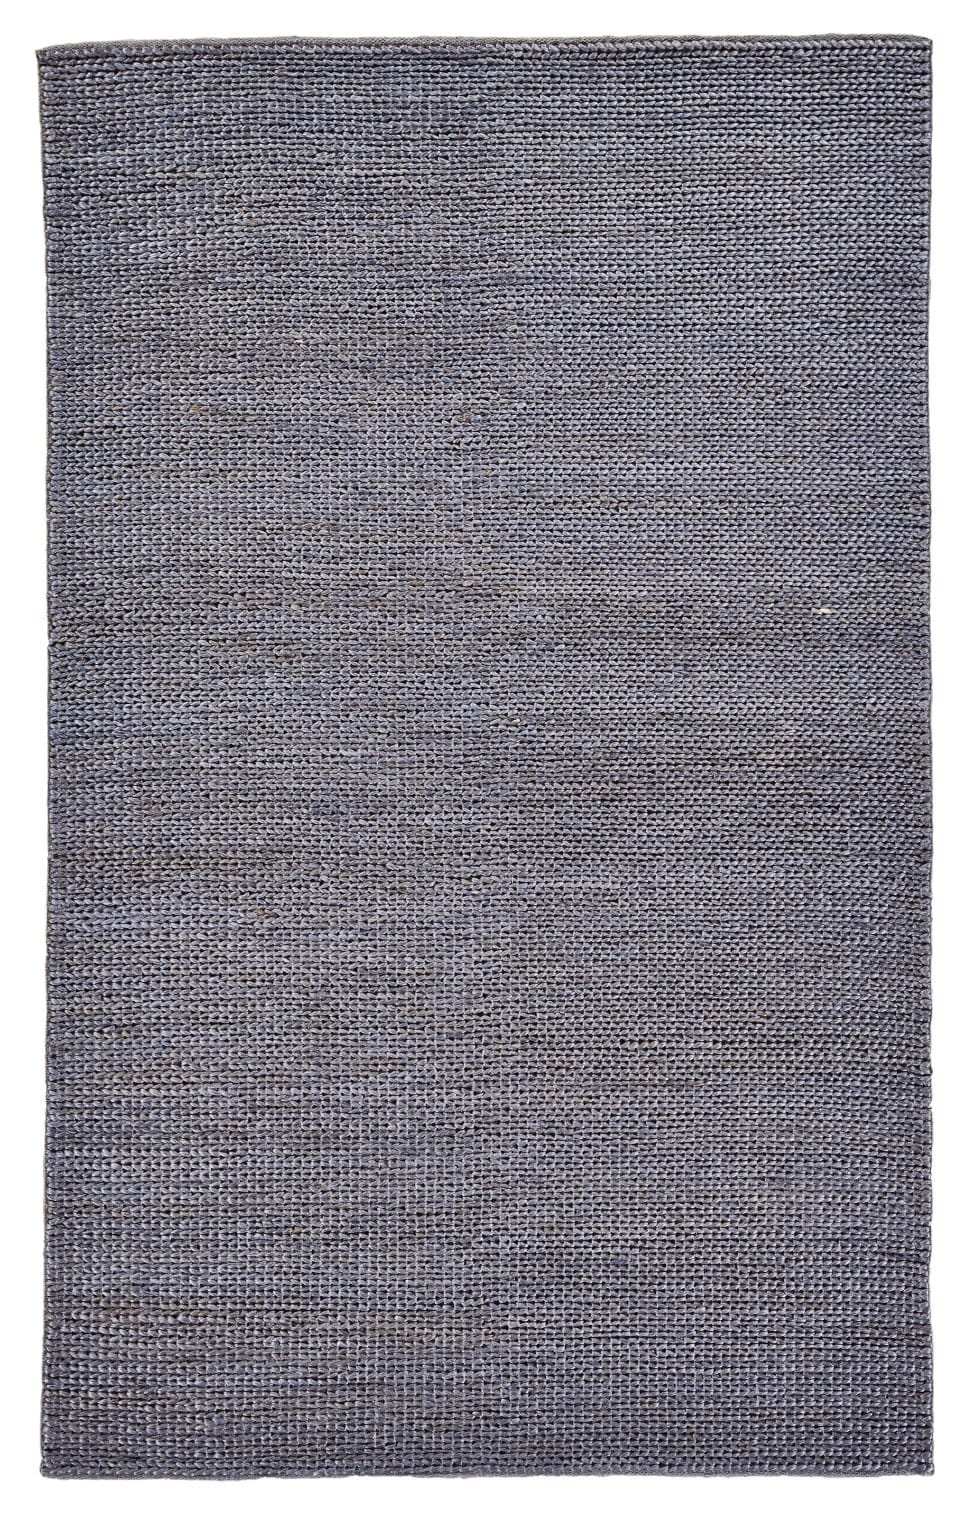 Feizy Feizy Durham Natrual Jute Indoor & Outdoor Rug - Dark Navy Blue - Available in 3 Sizes